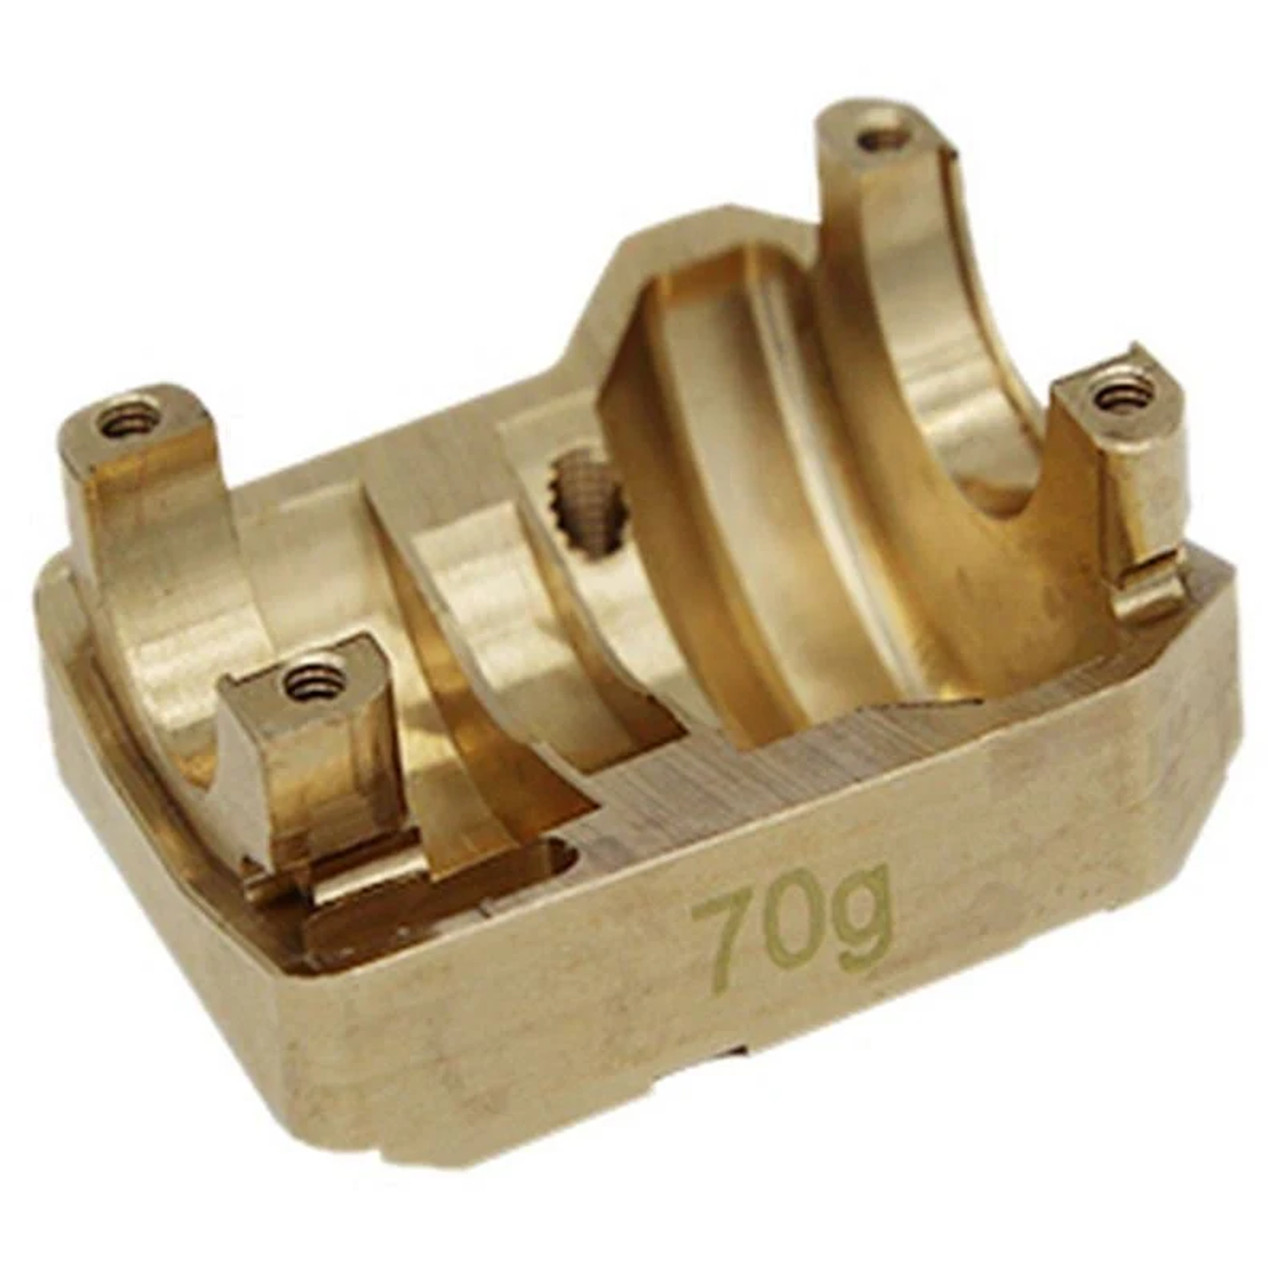 Hot Racing Heavy 70g Brass Differential Cover, for Traxxas TRX-4